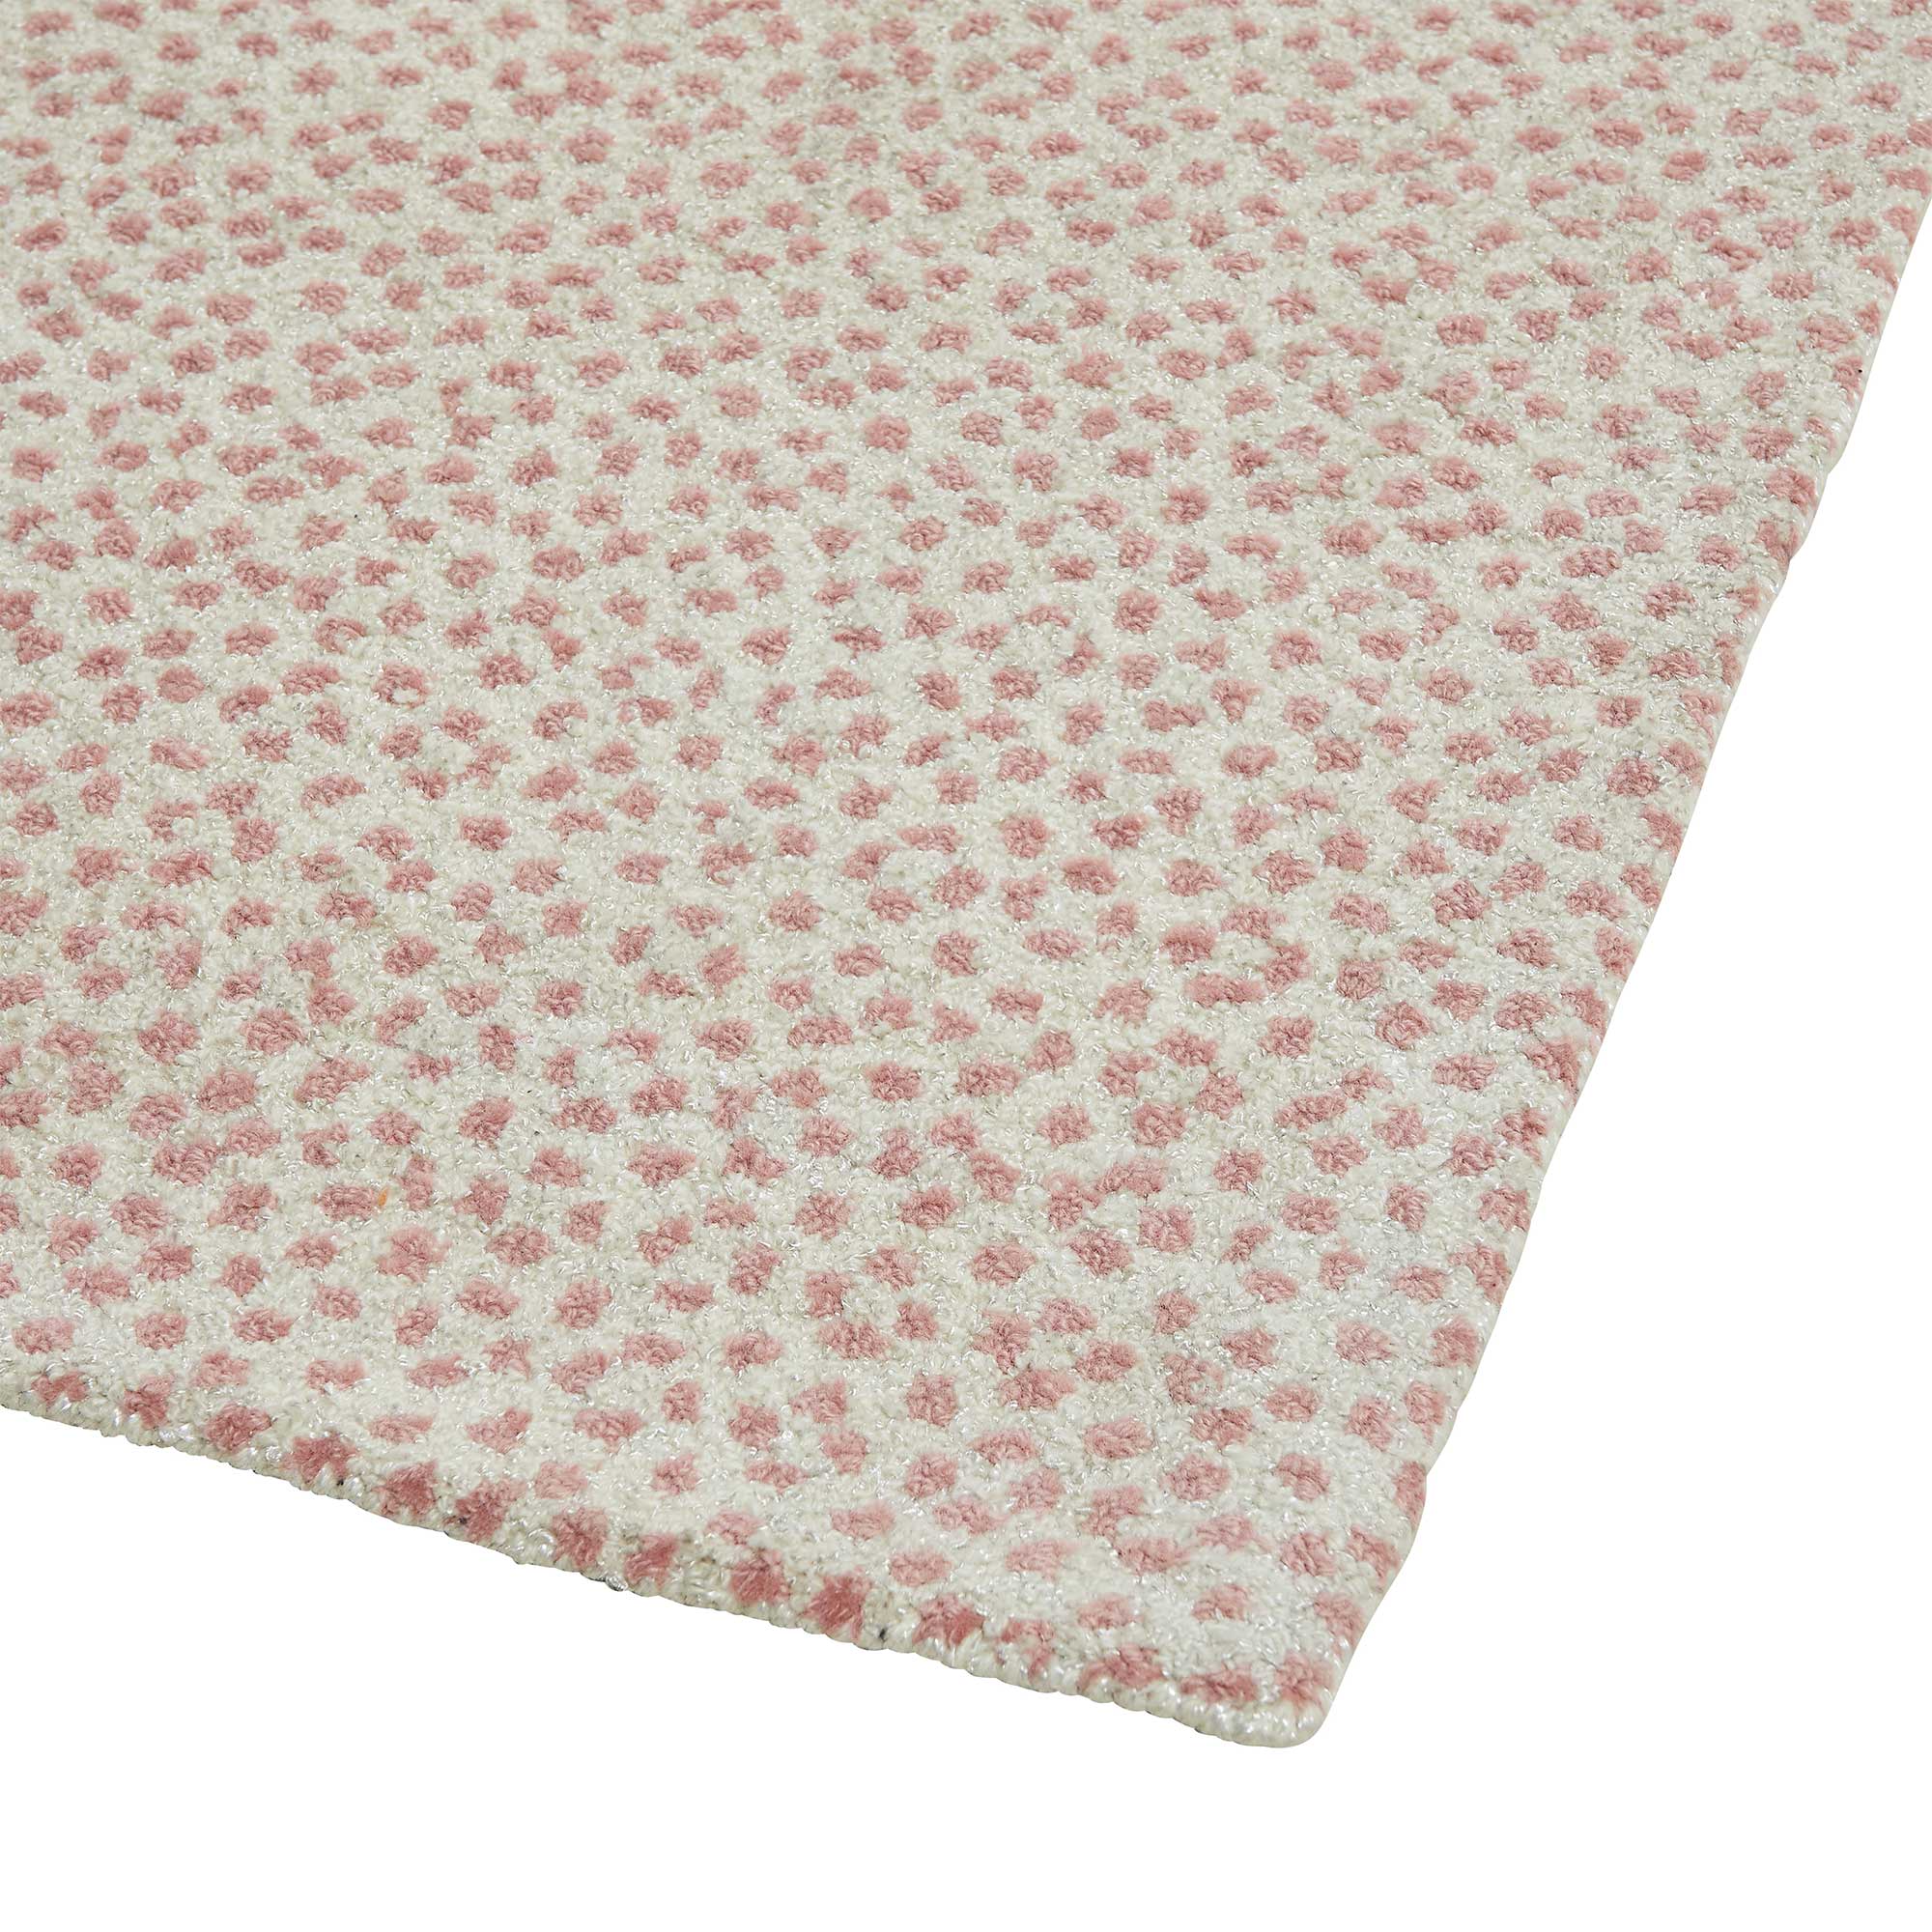 Leighton in Proper Pink Spotted Rug Sample